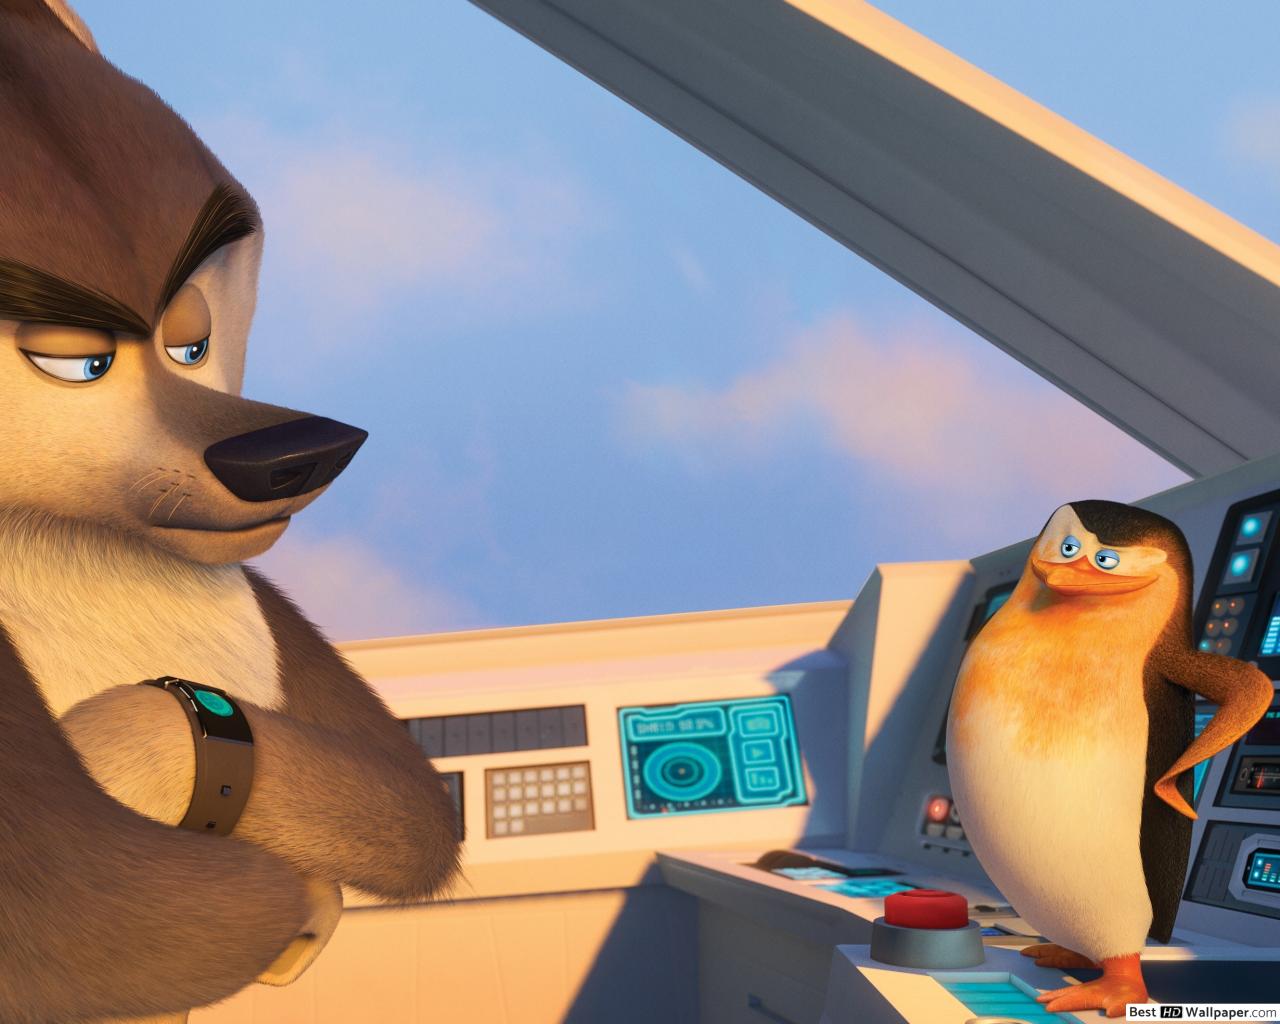 Penguins Of Madagascar The Wolf And Skipper HD Wallpaper